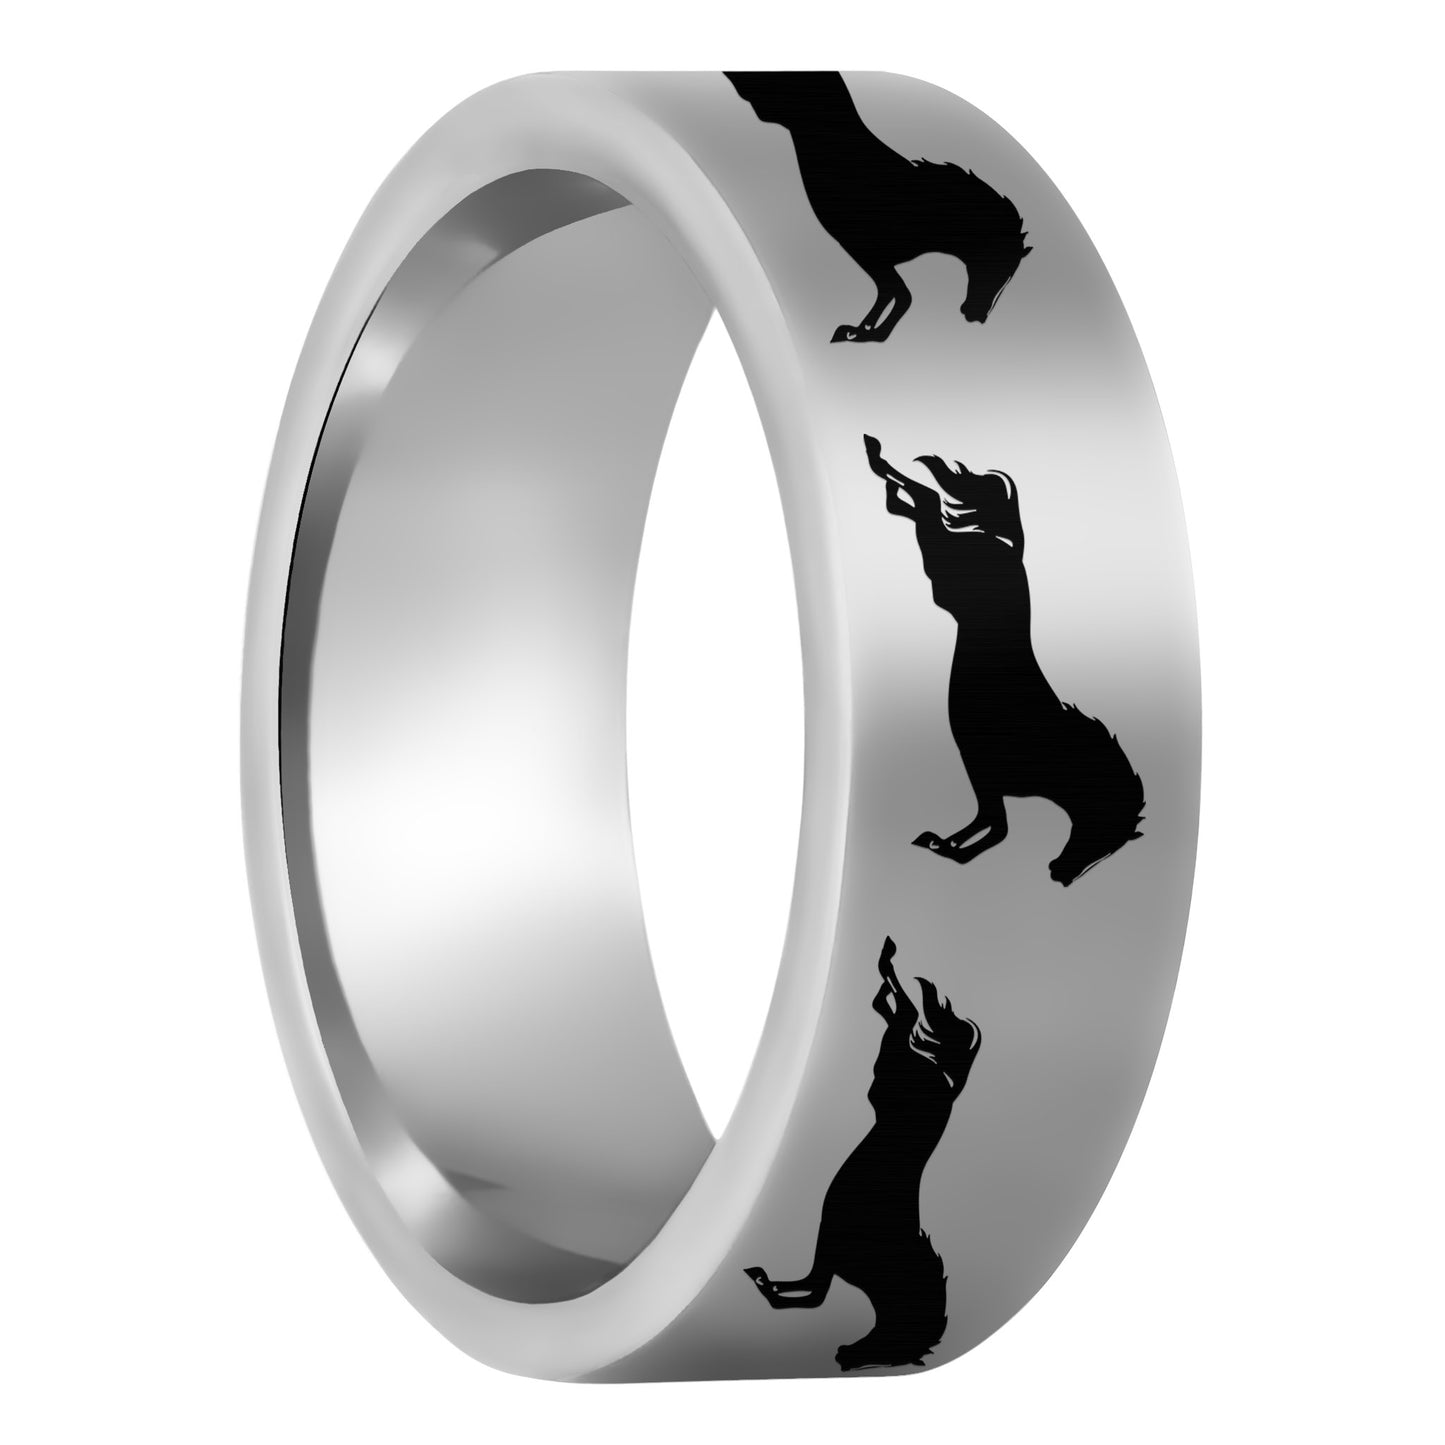 One Galloping Horses Tungsten Men's Wedding Band displayed on a plain white background